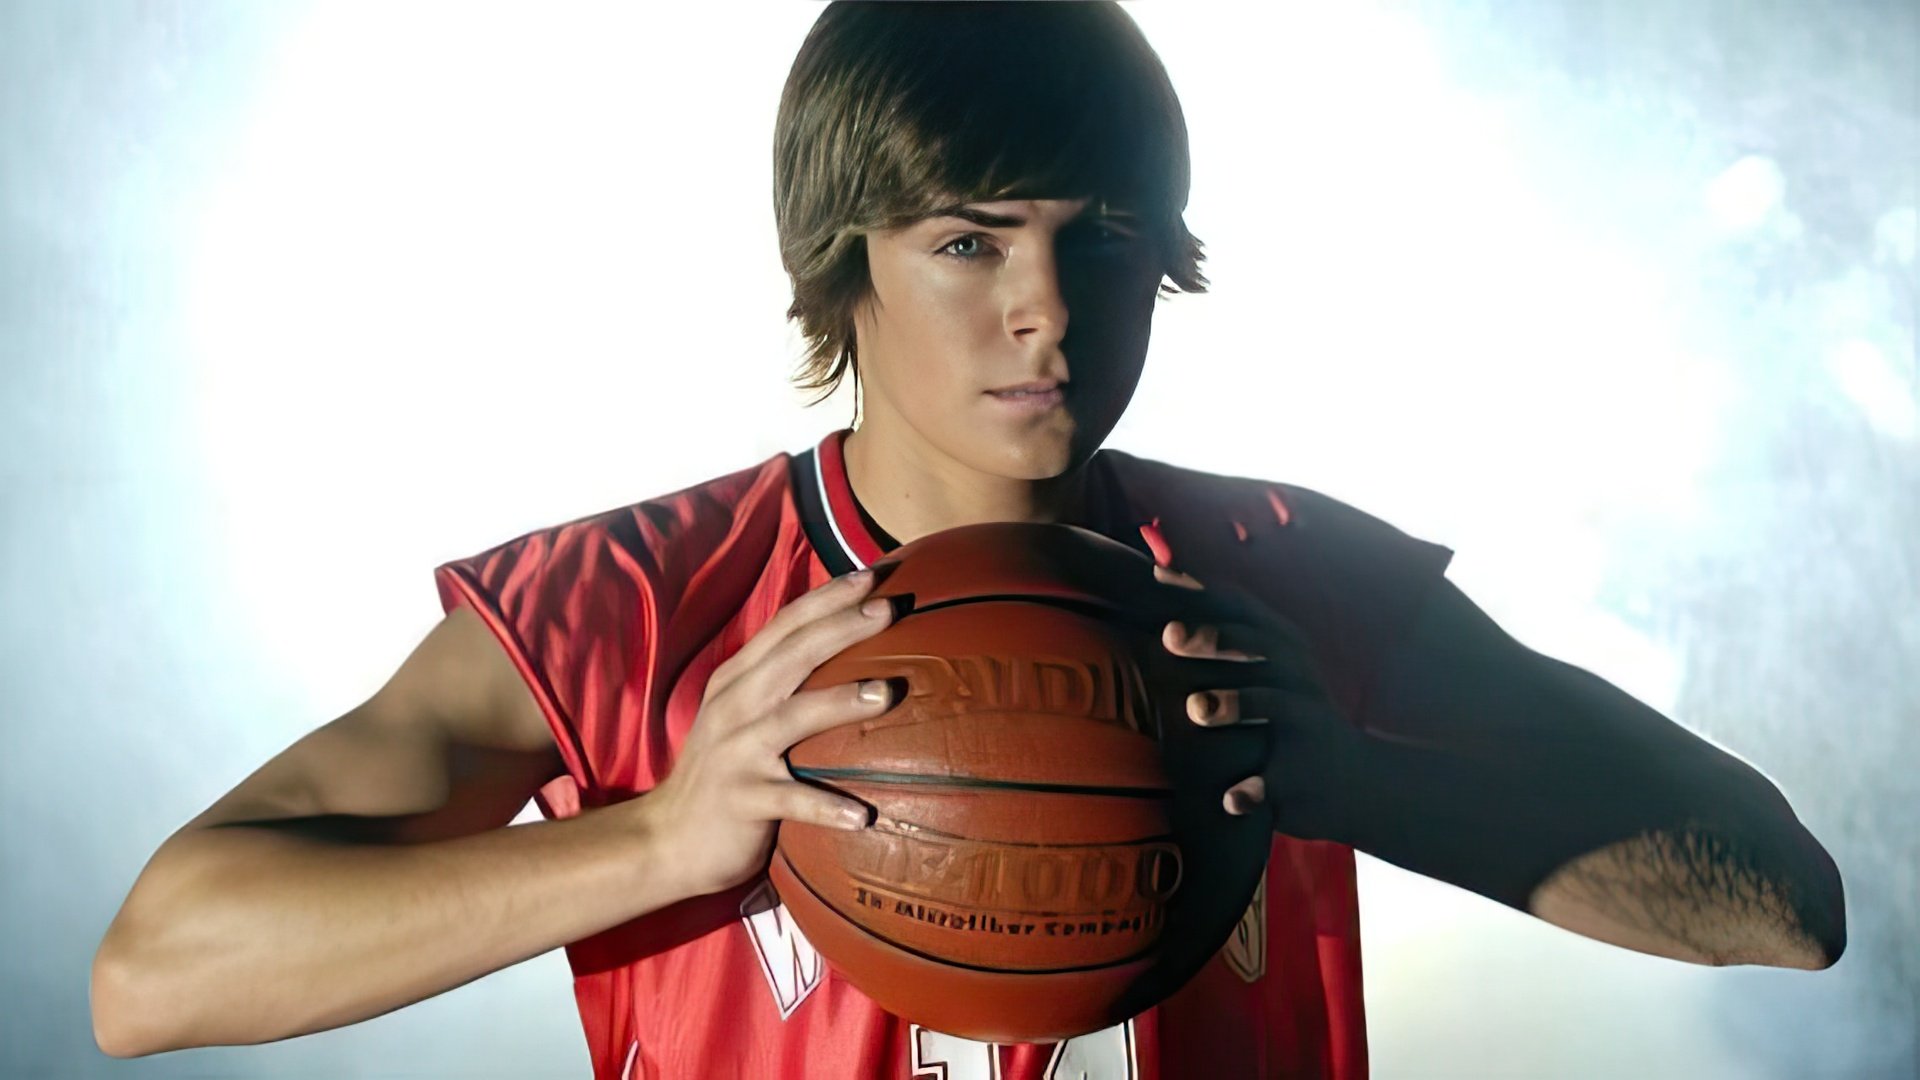 Zac Efron is a basketball star